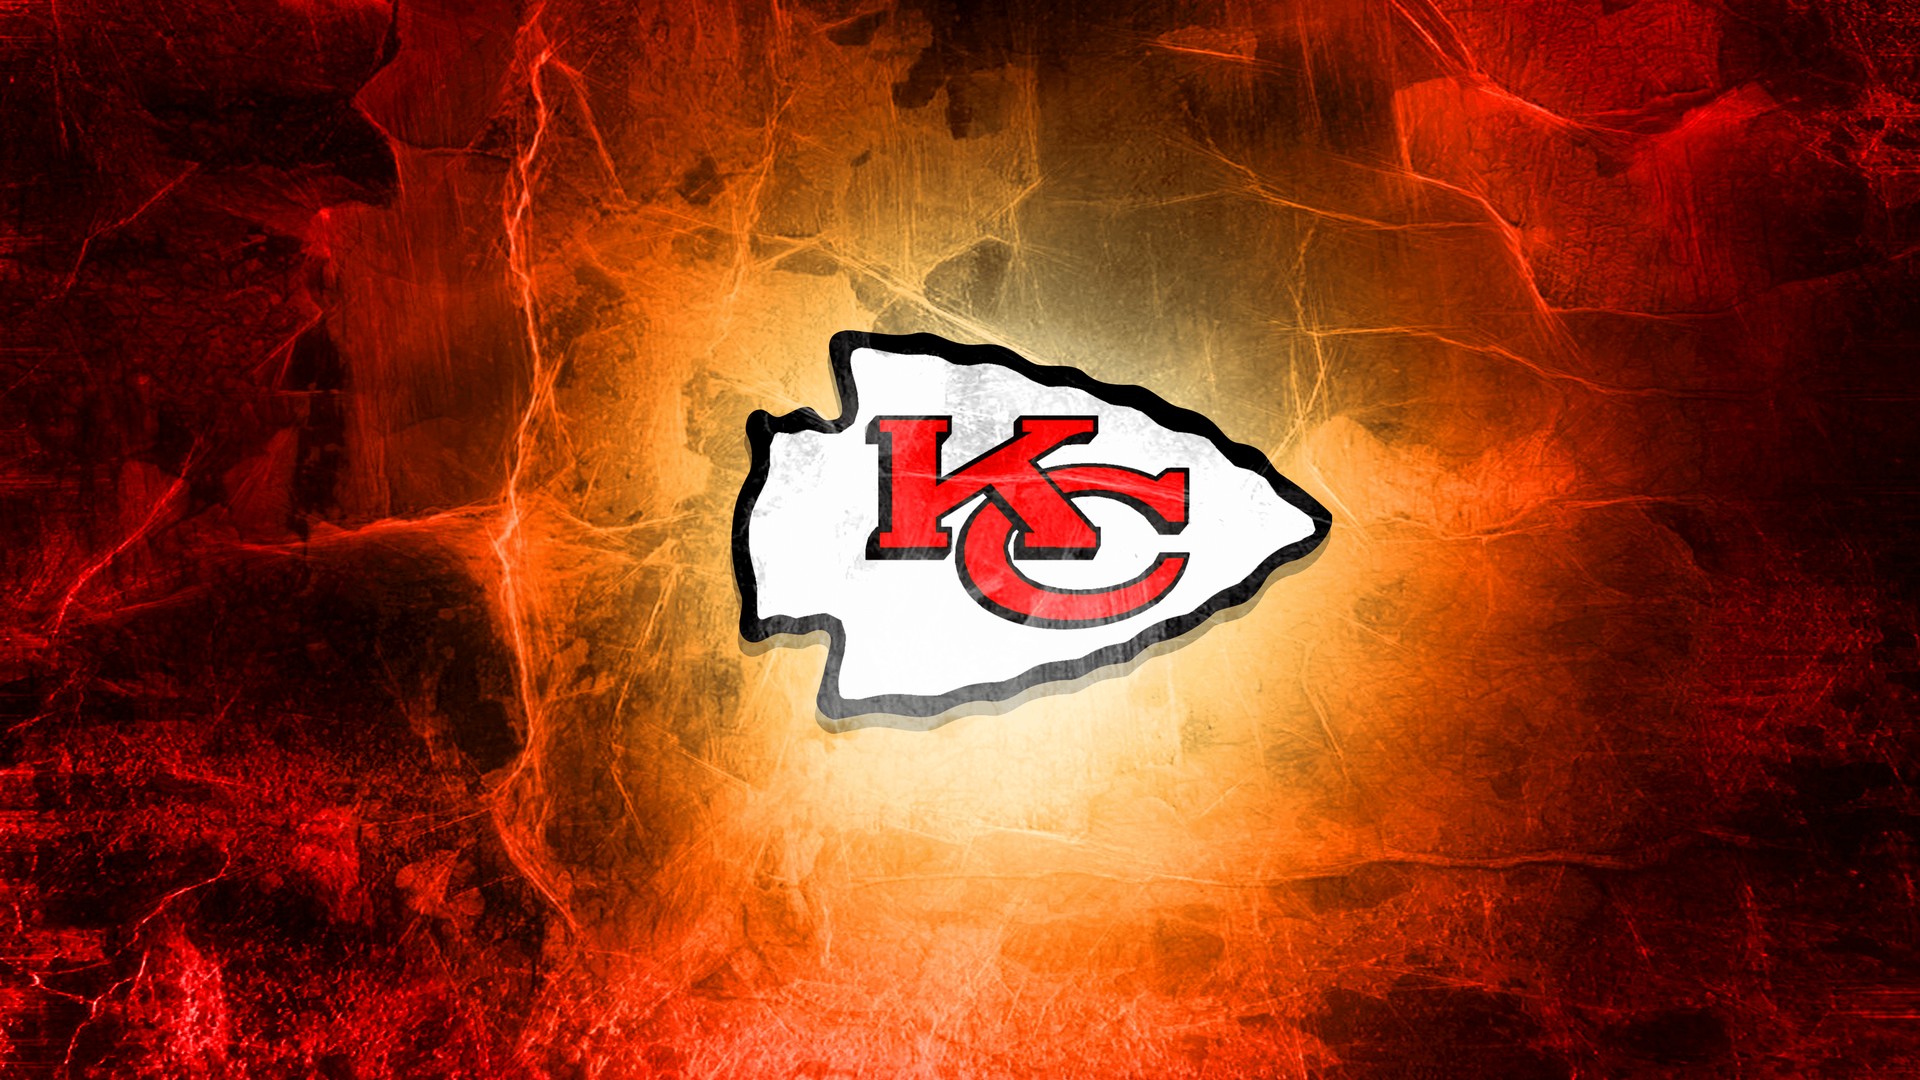 HD Backgrounds Kansas City Chiefs with resolution 1920x1080 pixel. You can make this wallpaper for your Mac or Windows Desktop Background, iPhone, Android or Tablet and another Smartphone device